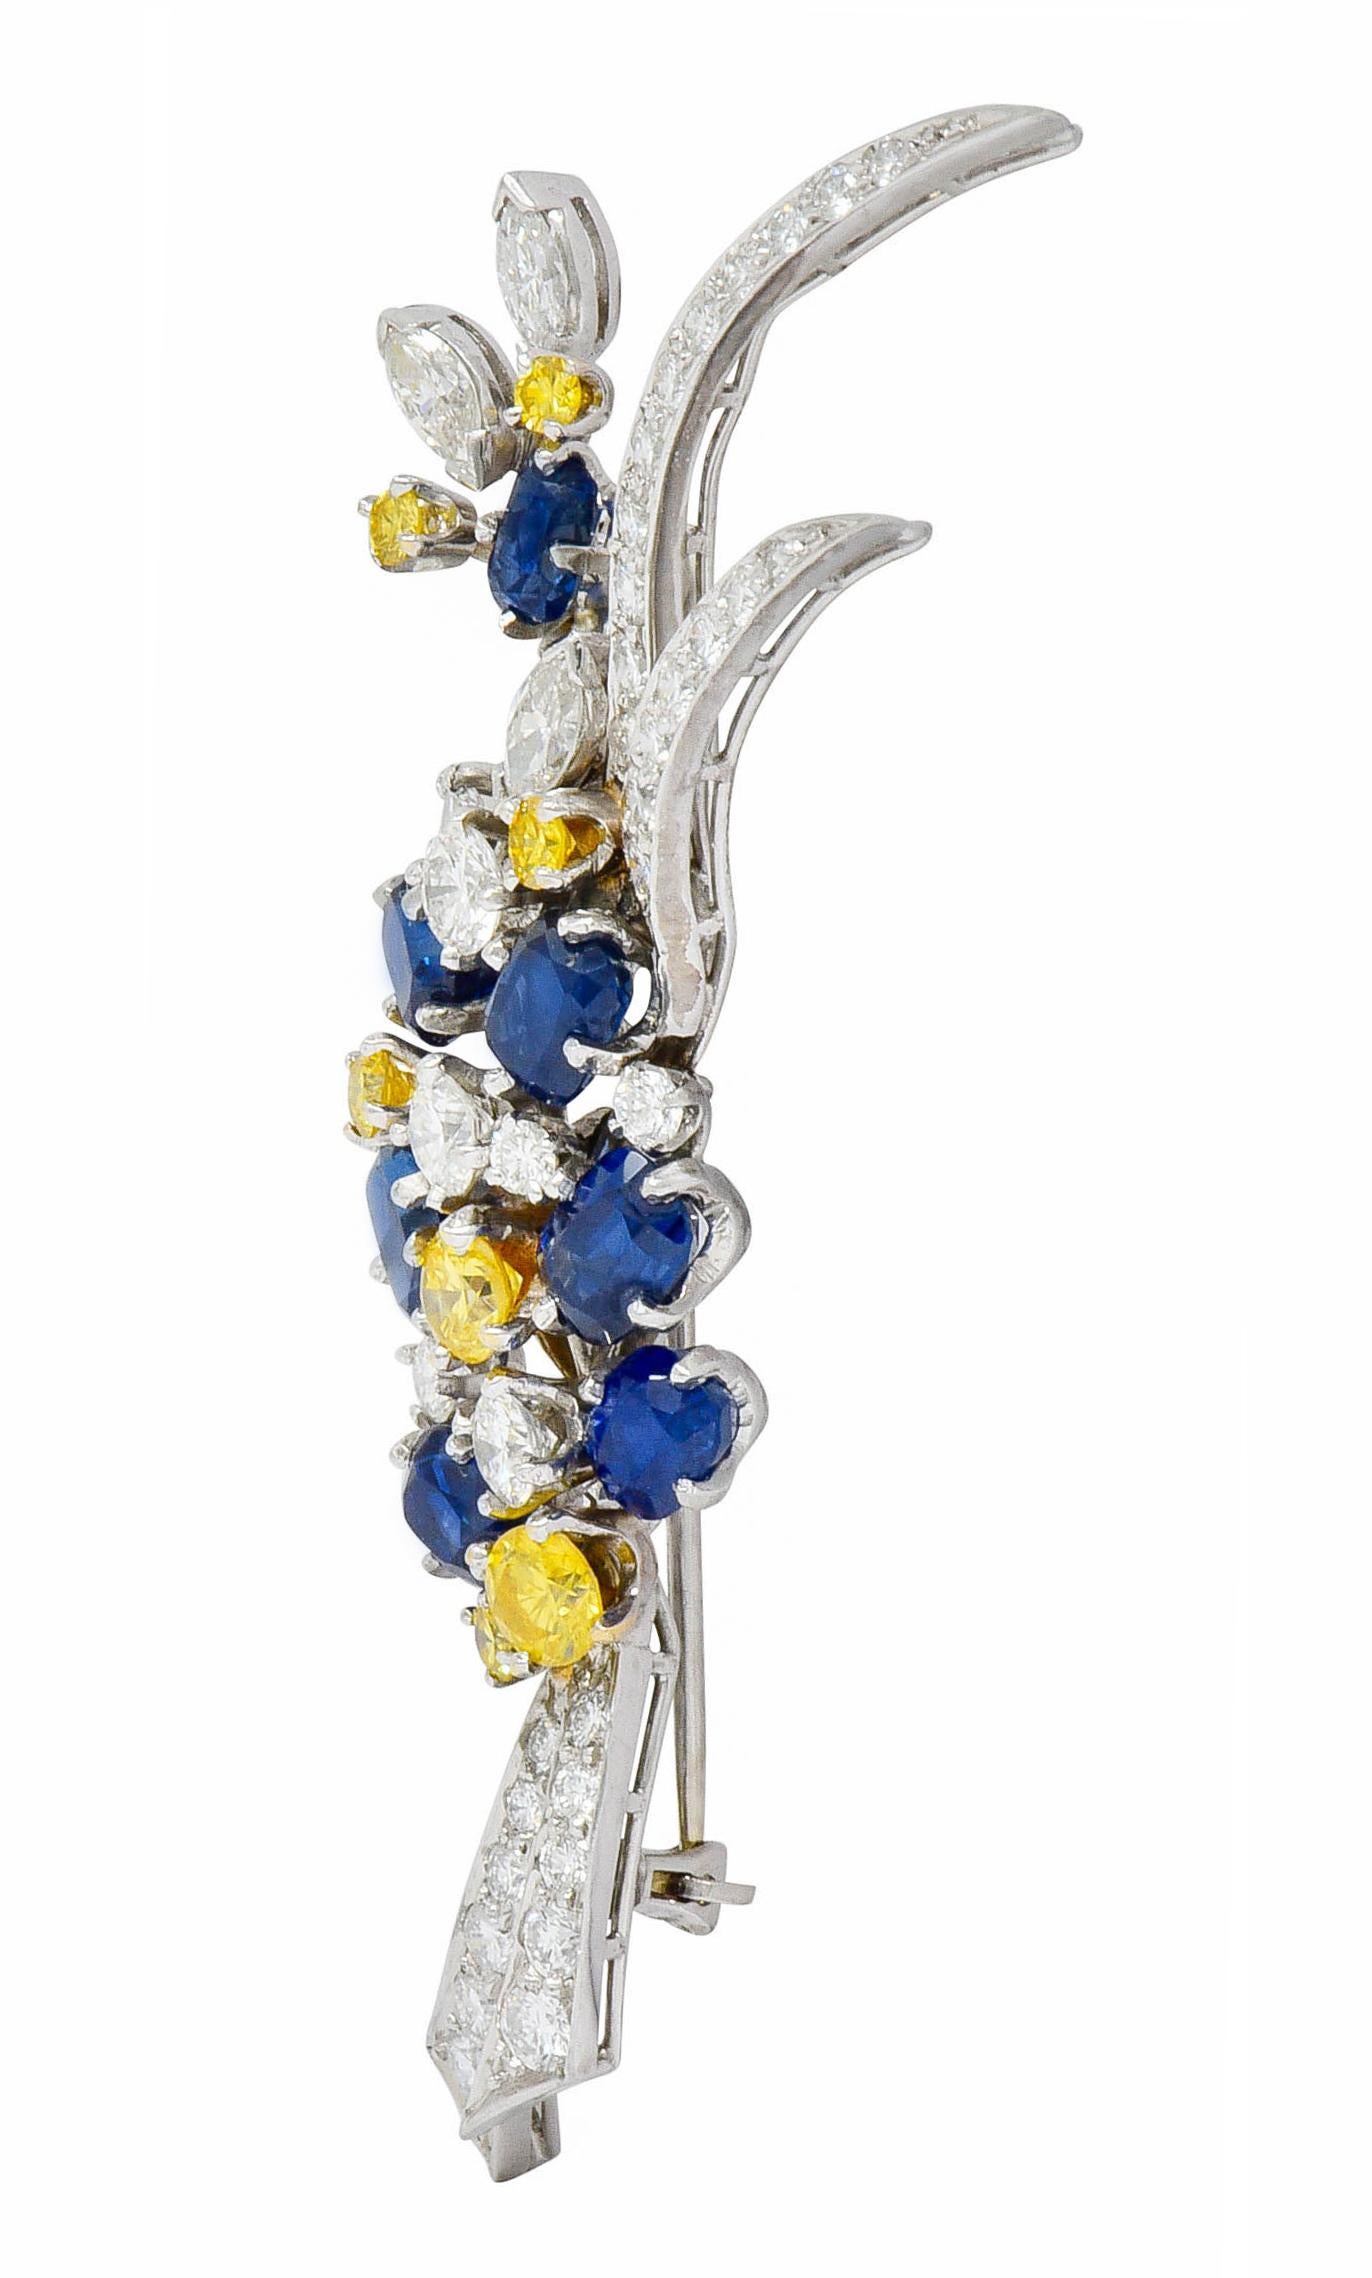 Linear brooch is designed as a flourishing boutonnière of sapphires, diamonds, and yellow diamonds

Cushion and rectangular cushion cut sapphires are an incredibly well-matched royal blue and weigh in total approximately 3.00 carats

Accented by